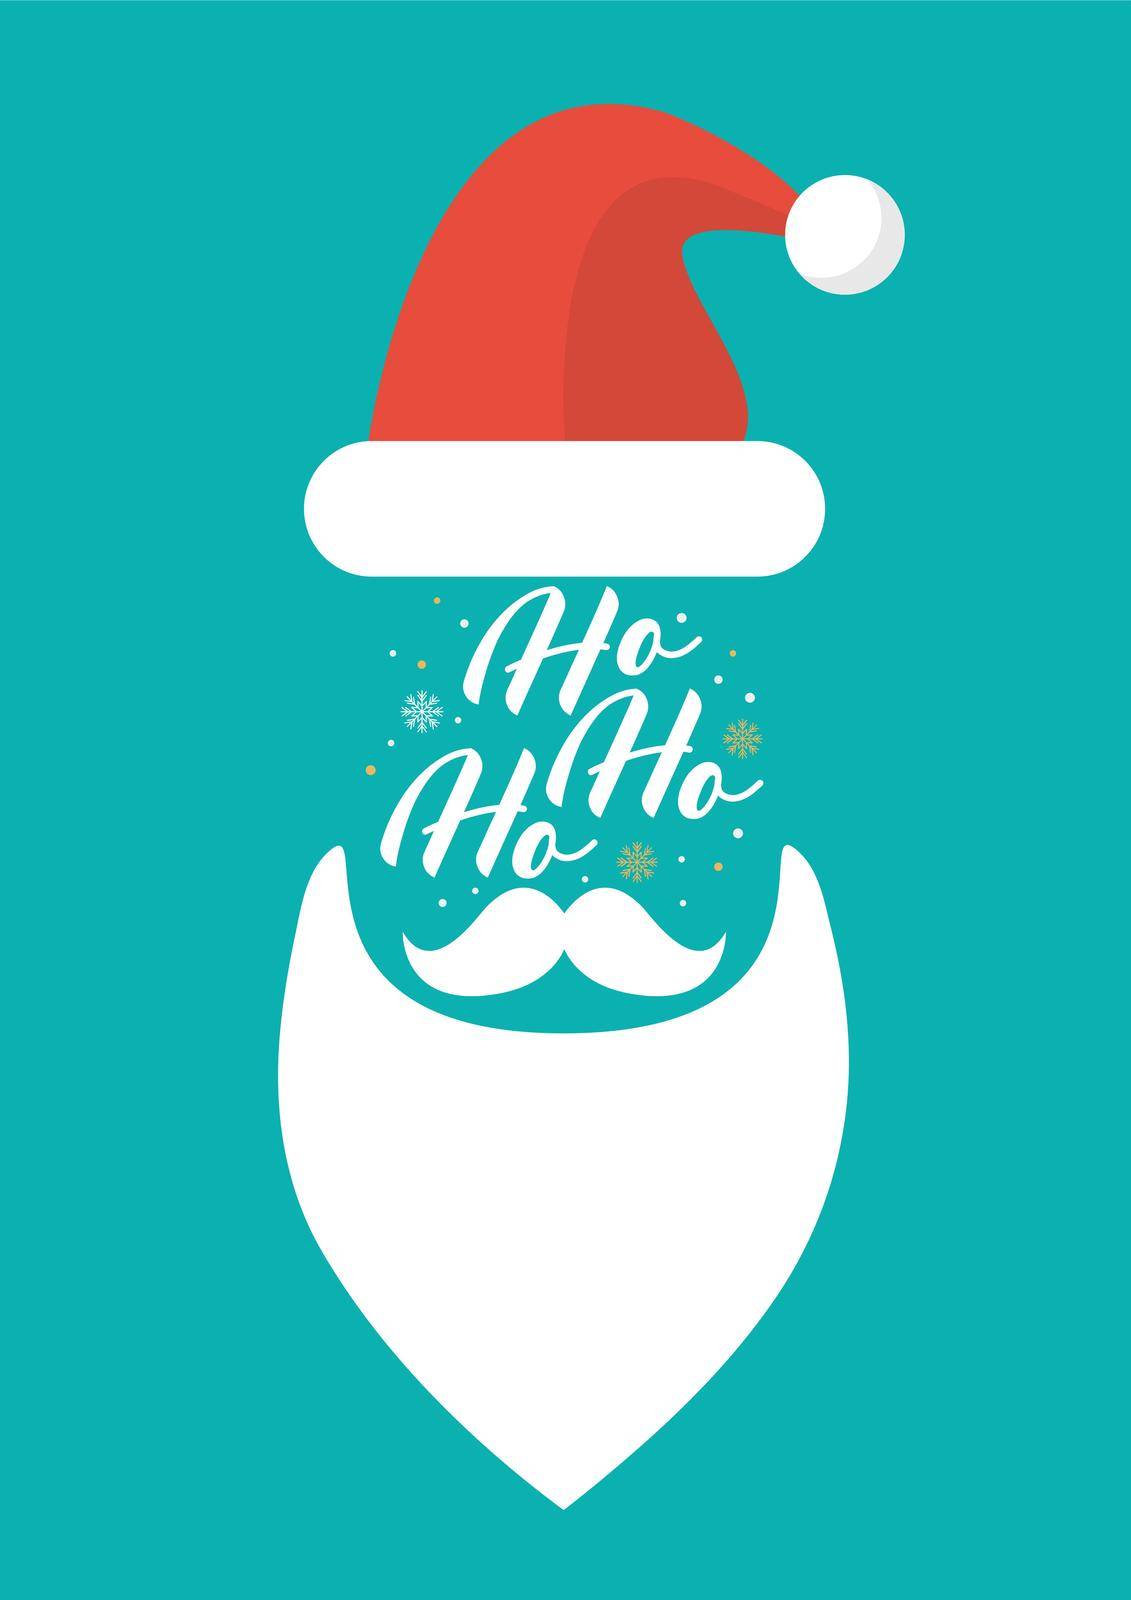 Hat Beard Mustache and Glasses of Santa with Ho-Ho-Ho text by siraanamwong